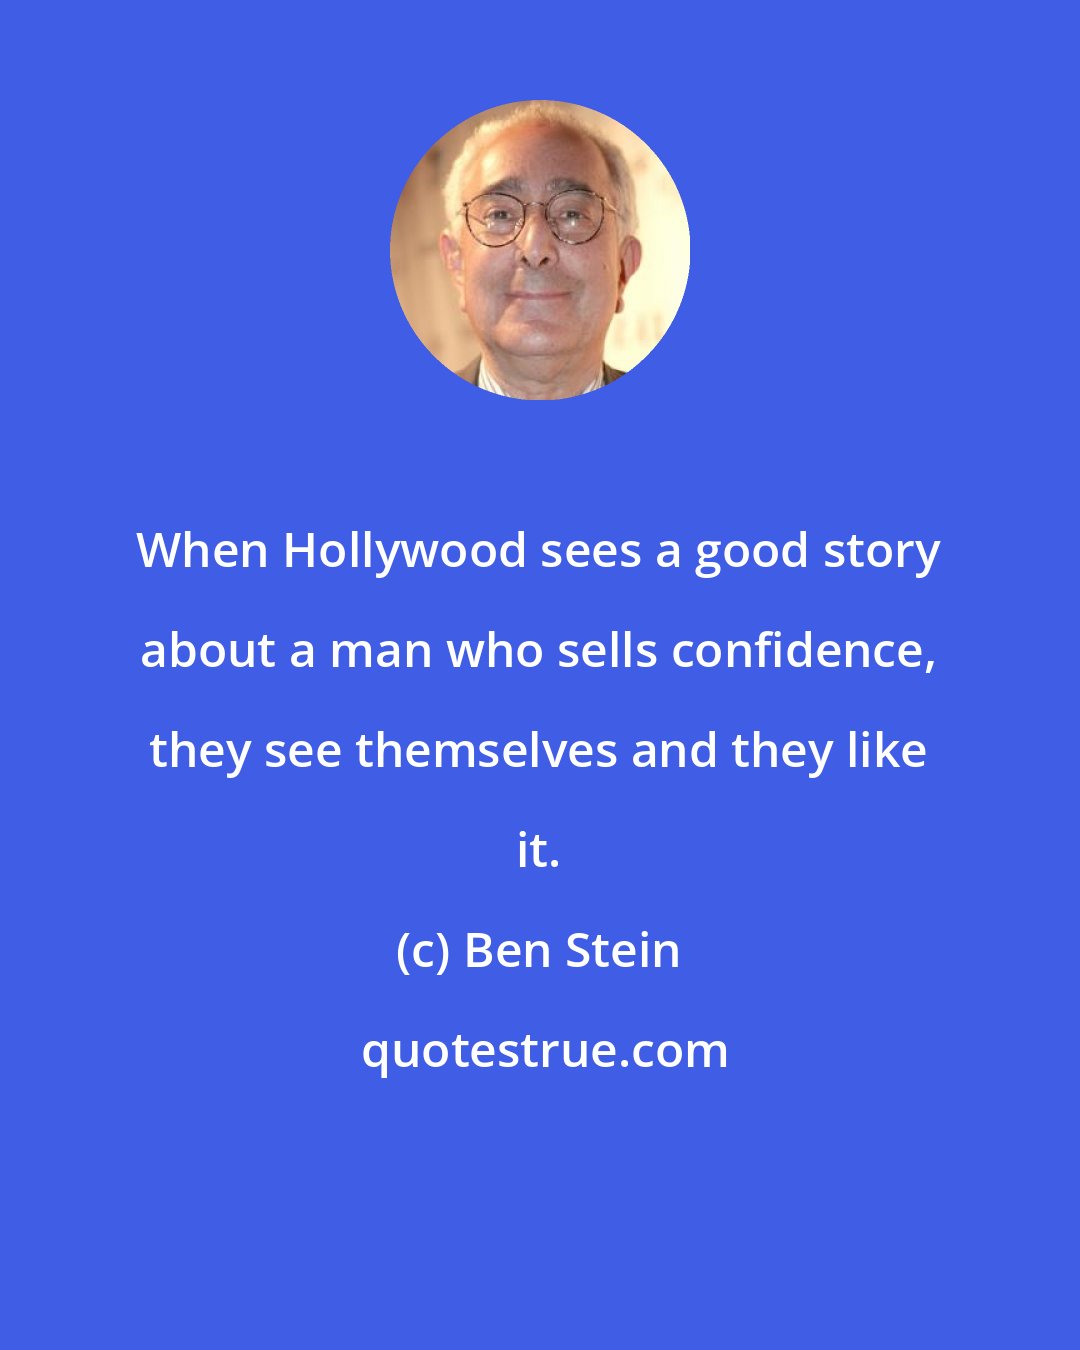 Ben Stein: When Hollywood sees a good story about a man who sells confidence, they see themselves and they like it.